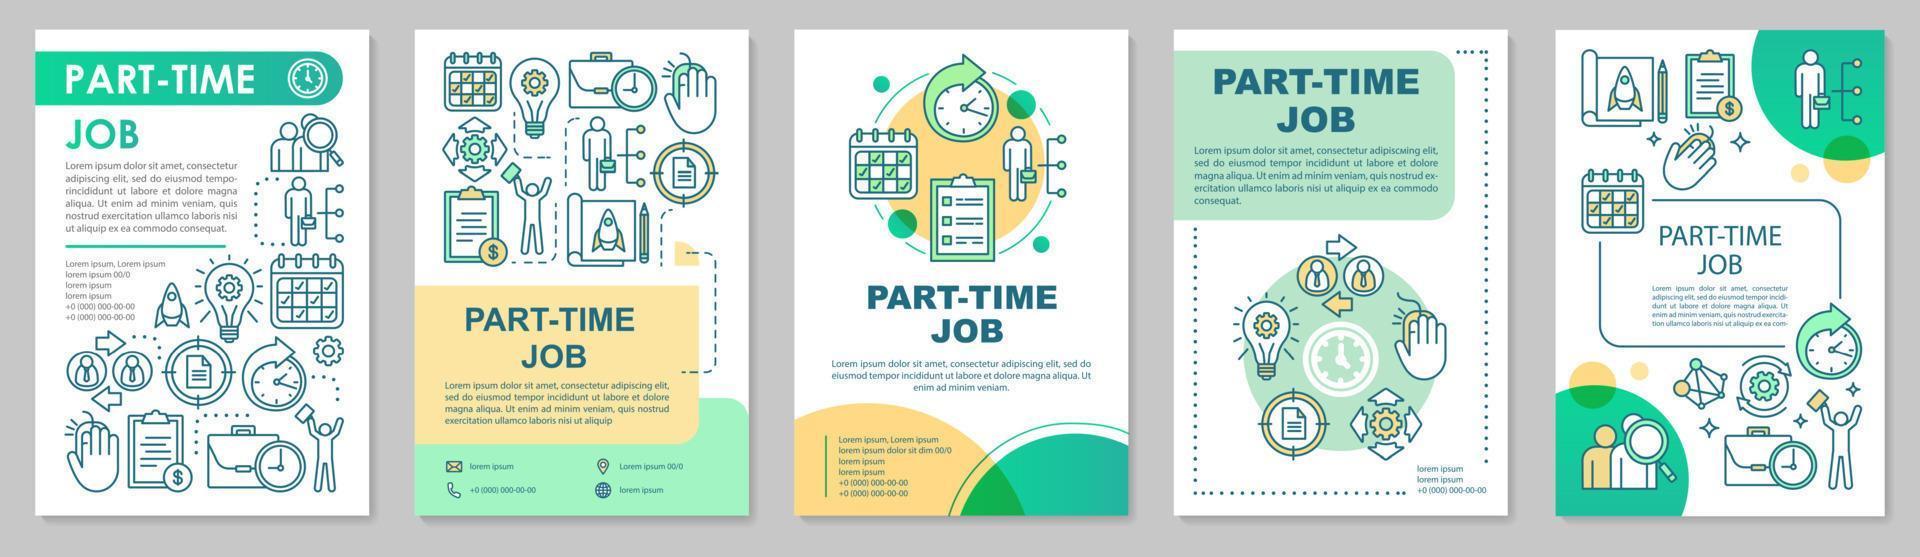 Part-time job brochure template layout. Short-term employment. Job recruitment. Flyer, booklet, leaflet print design with linear illustrations. Vector page layouts for magazines, advertising posters